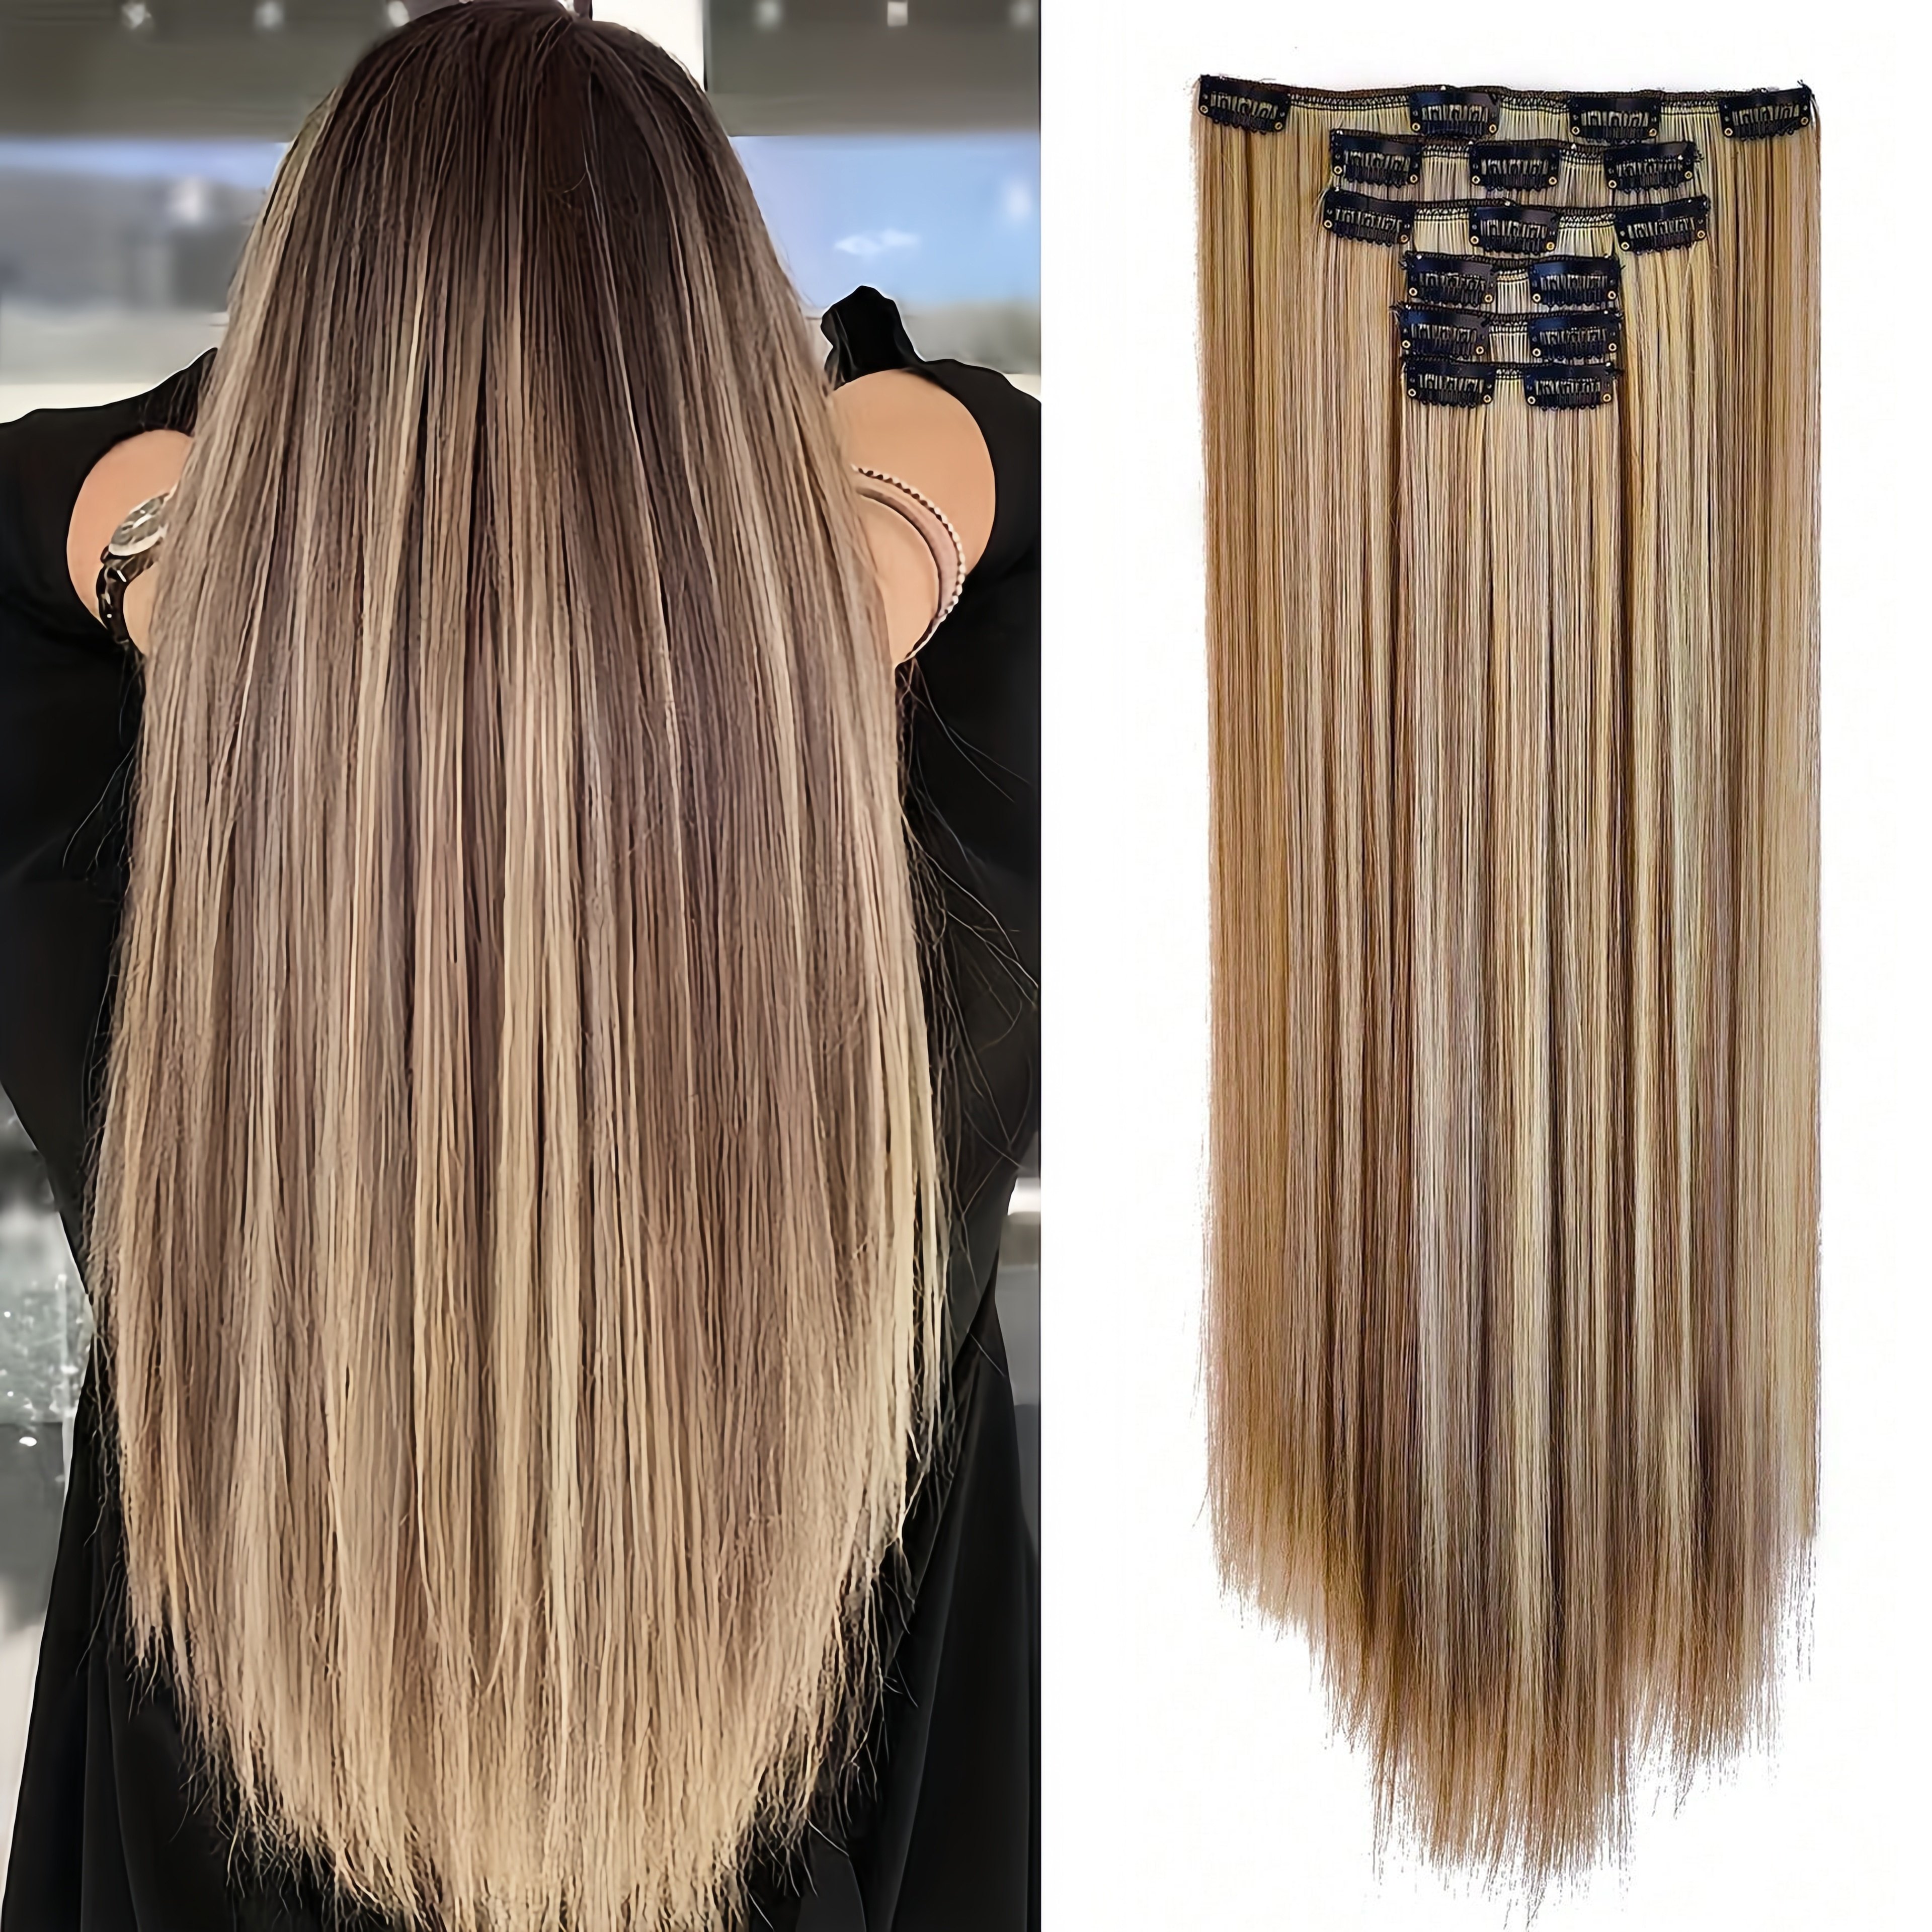 

Clip In Hair Extensions, Hair Extensions Thick Long Lace Weft Lightweight Synthetic Hairpieces For Women Chocolate Brown With Golden Blonde Highlights Hair Clips Hair Accessories